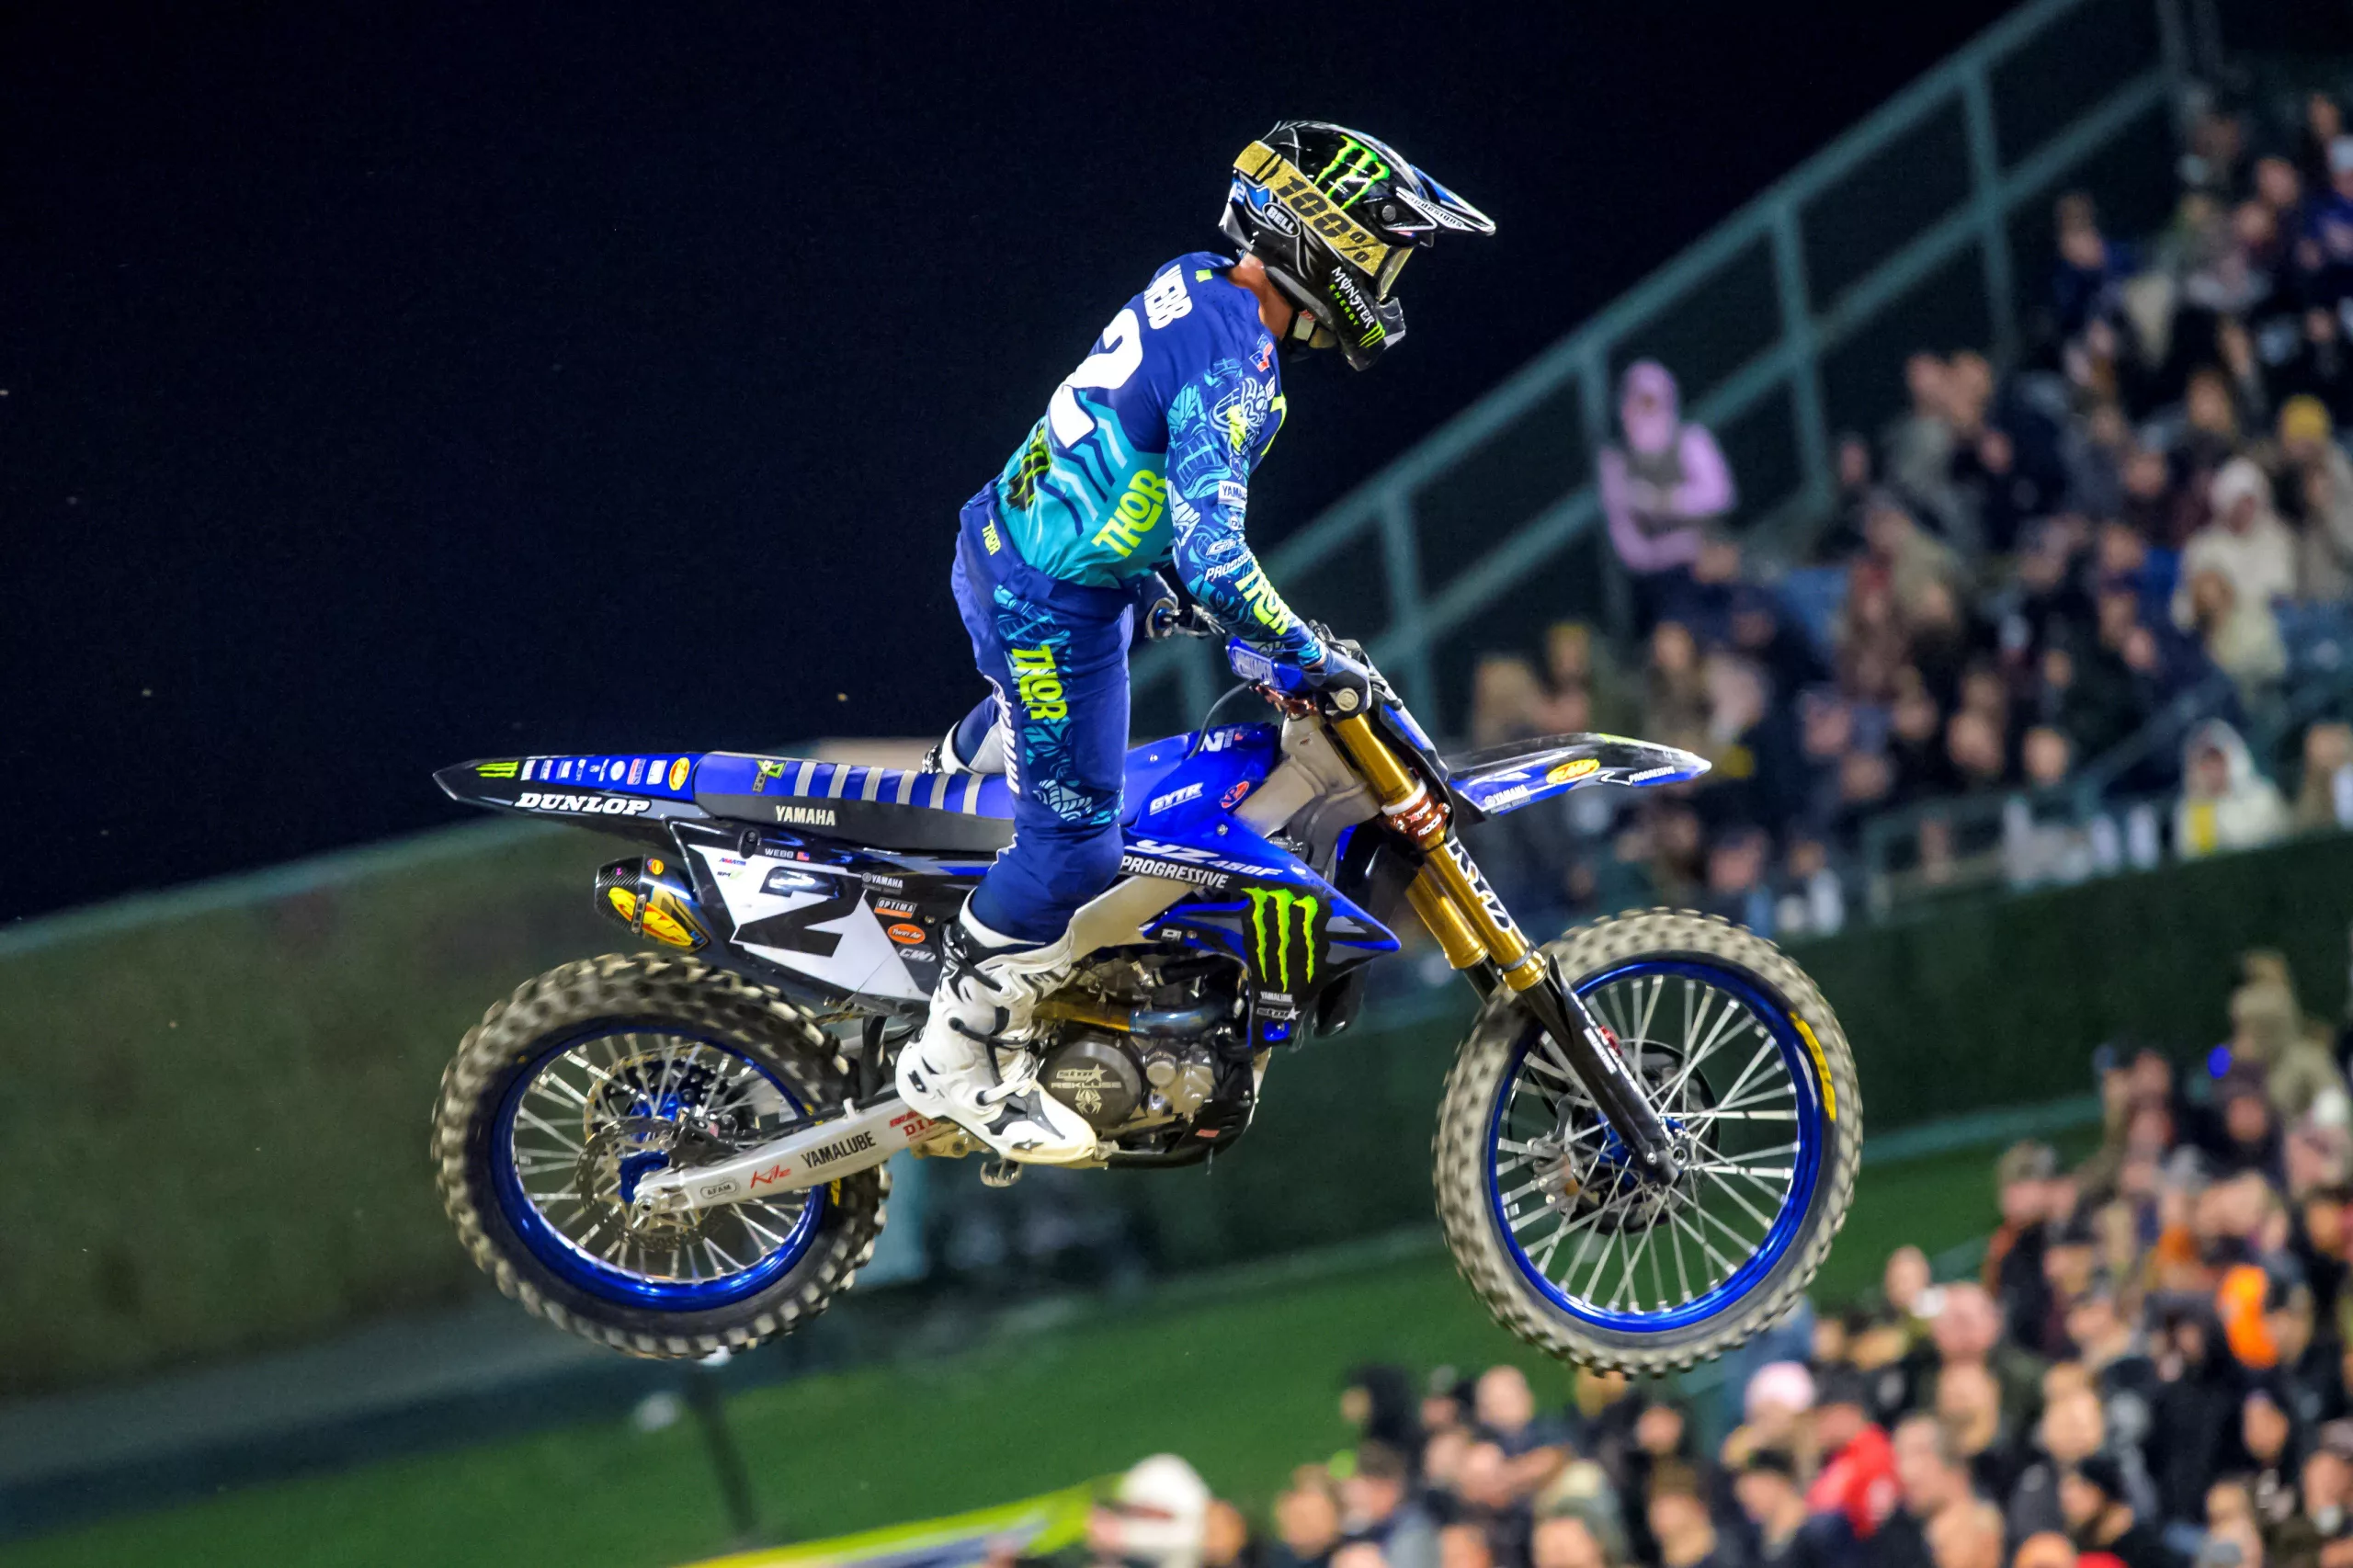 Cooper Webb, the No. 2 rider in the 450SX motorcycle class of the Monster Energy AMA Supercross Championship series